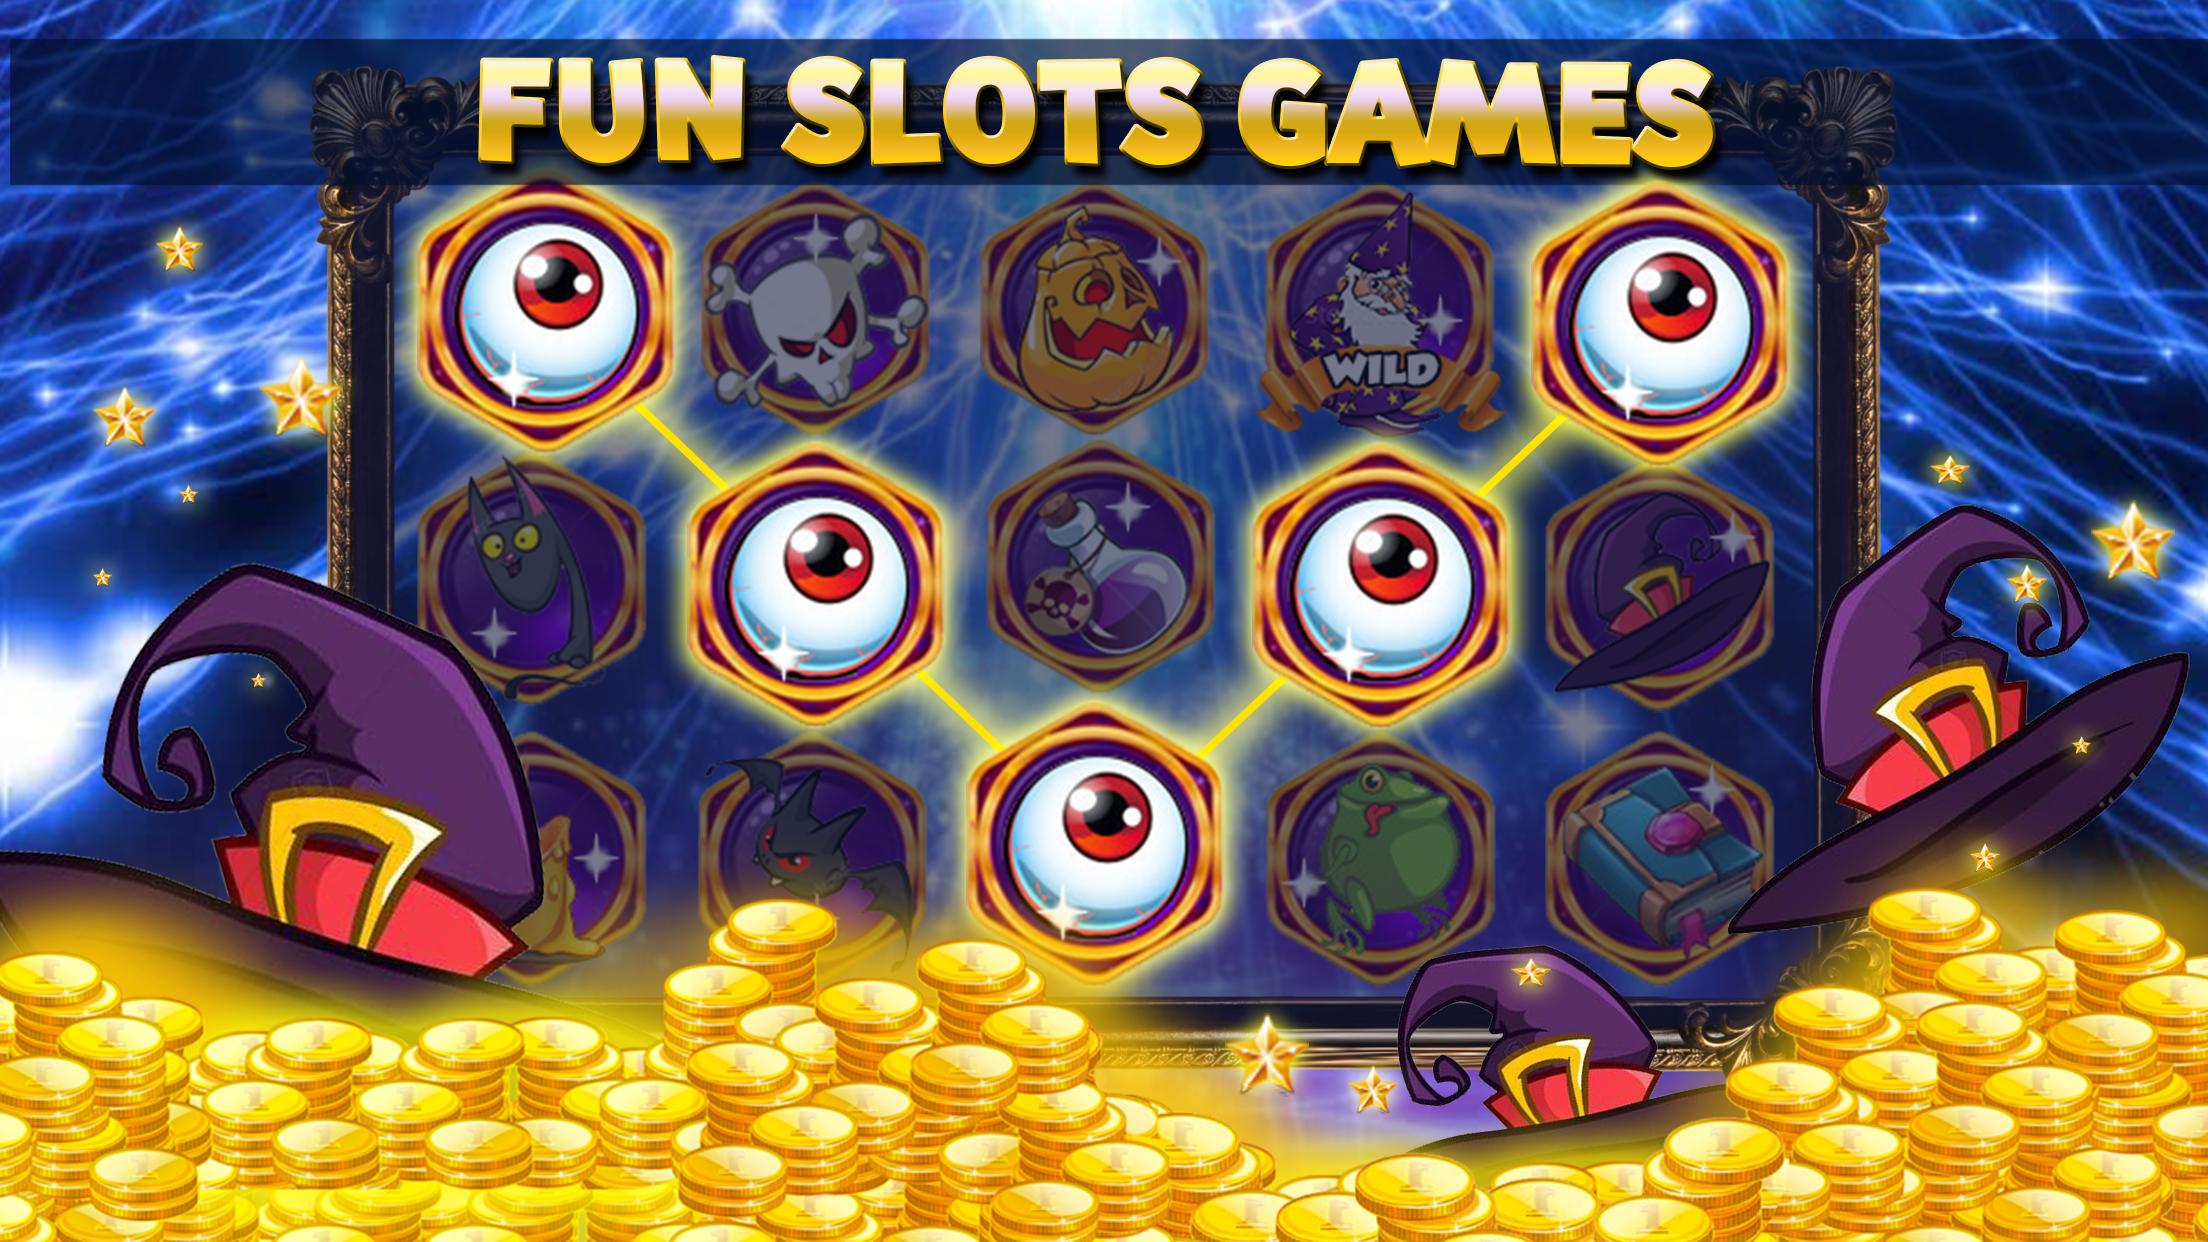 Free download slots games for fun hidden object games